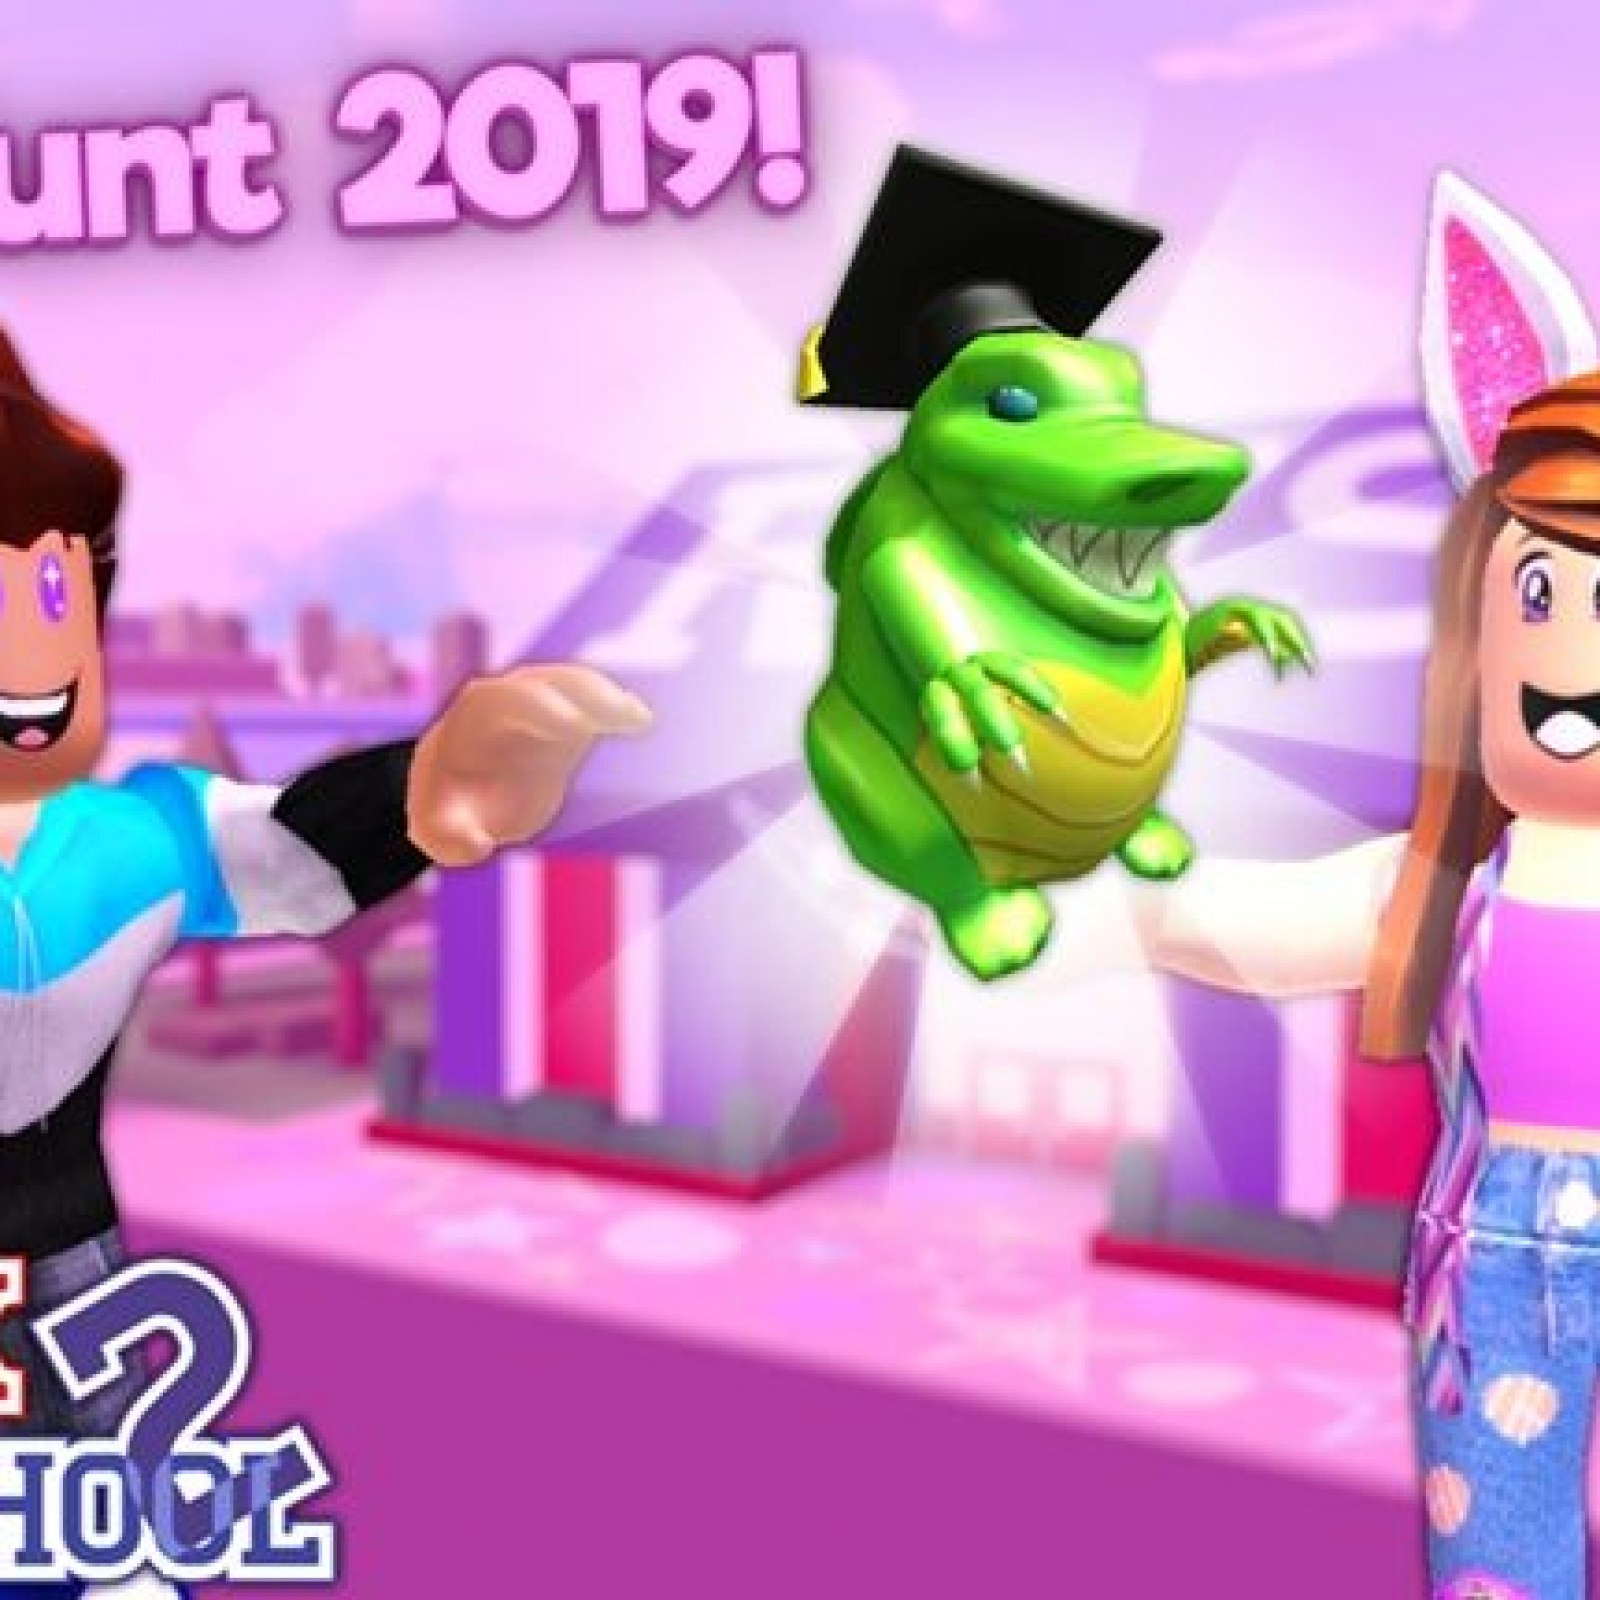 Roblox Event Toys 2019